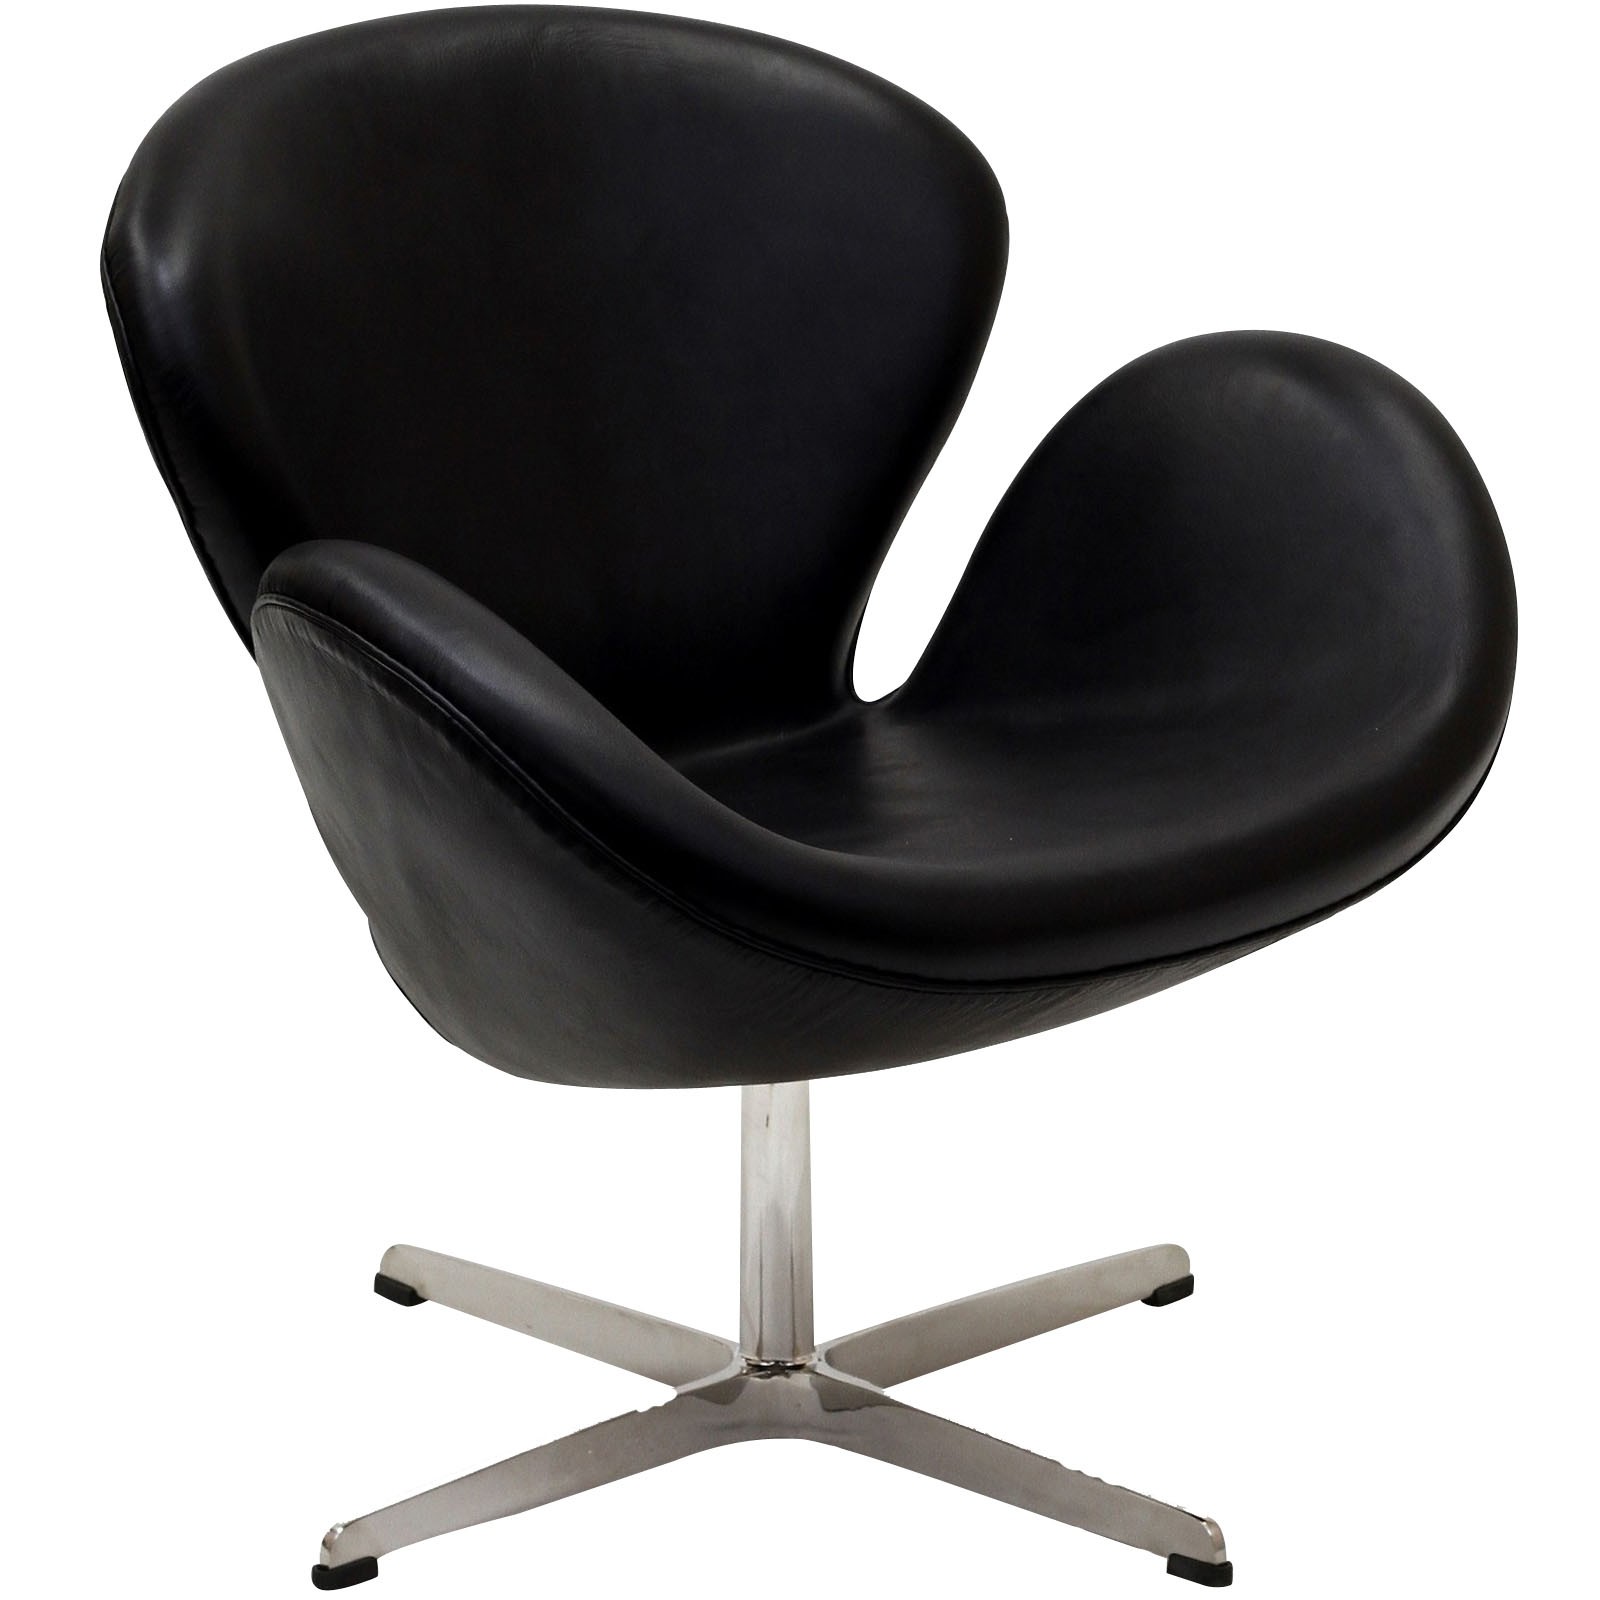 Arne Jacobsen Swan Chair Leather, White Leather Swan Chair